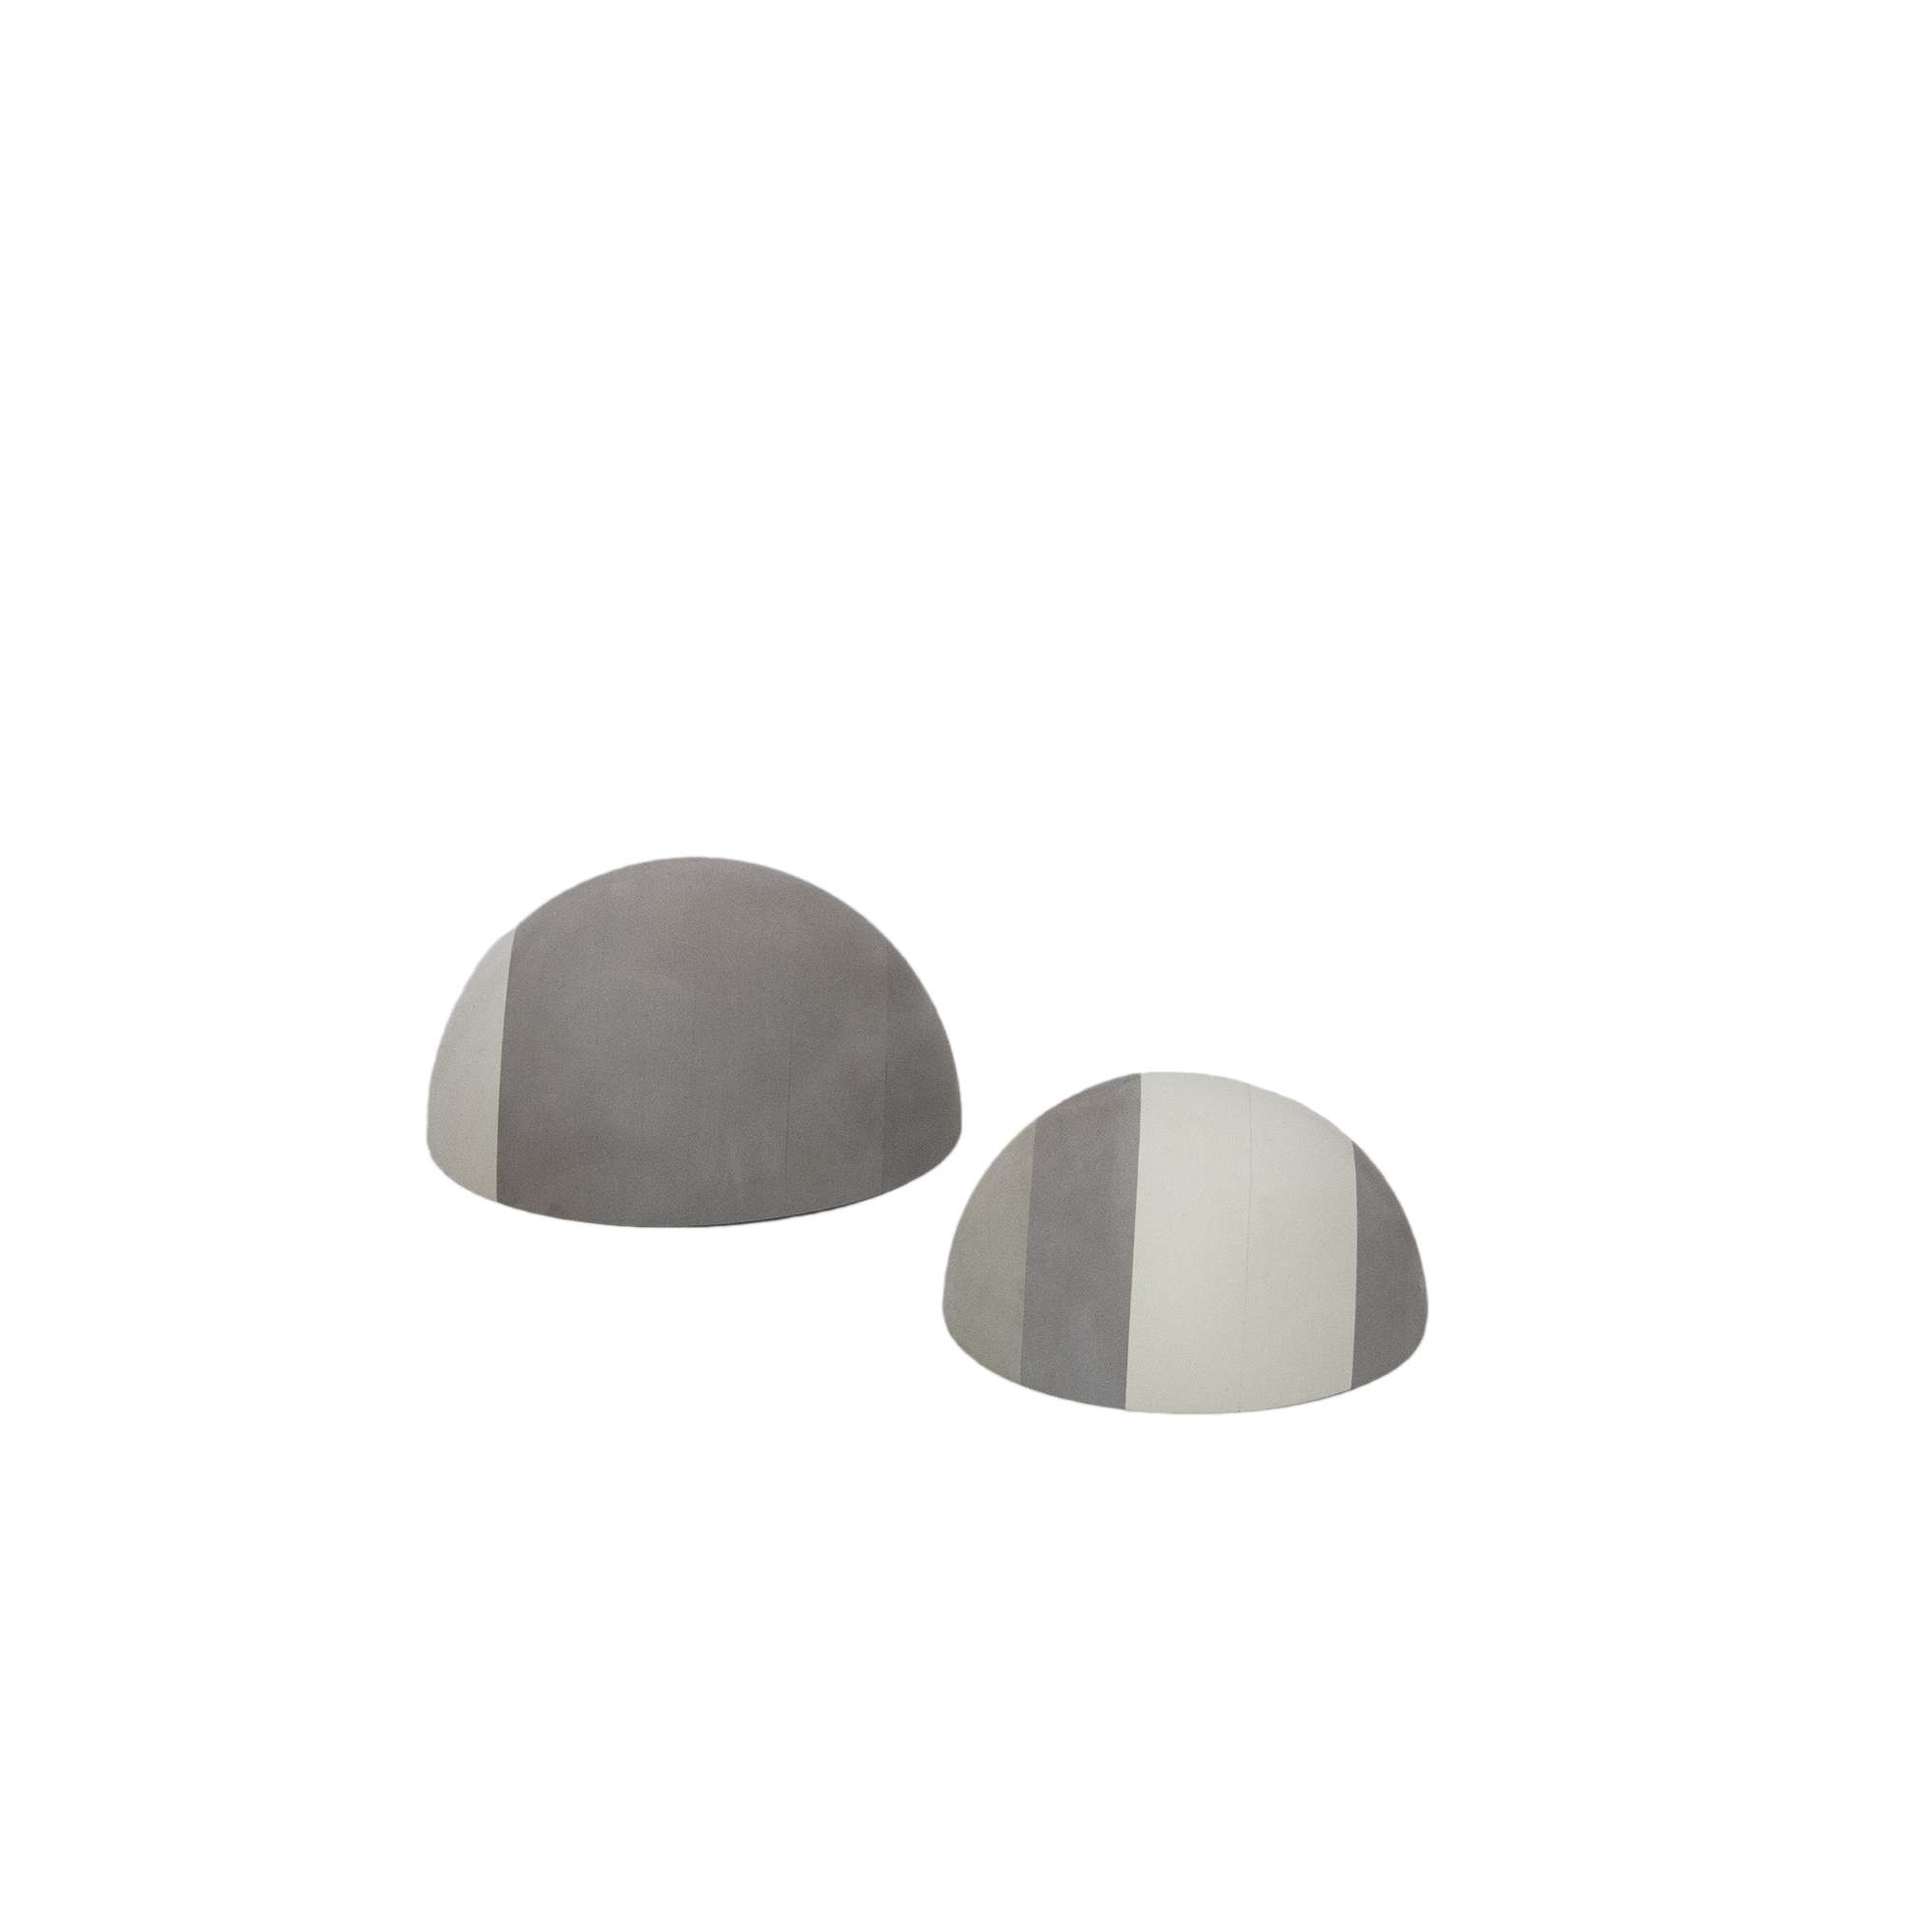 bObles - Large Step Stones - Grey - NEW